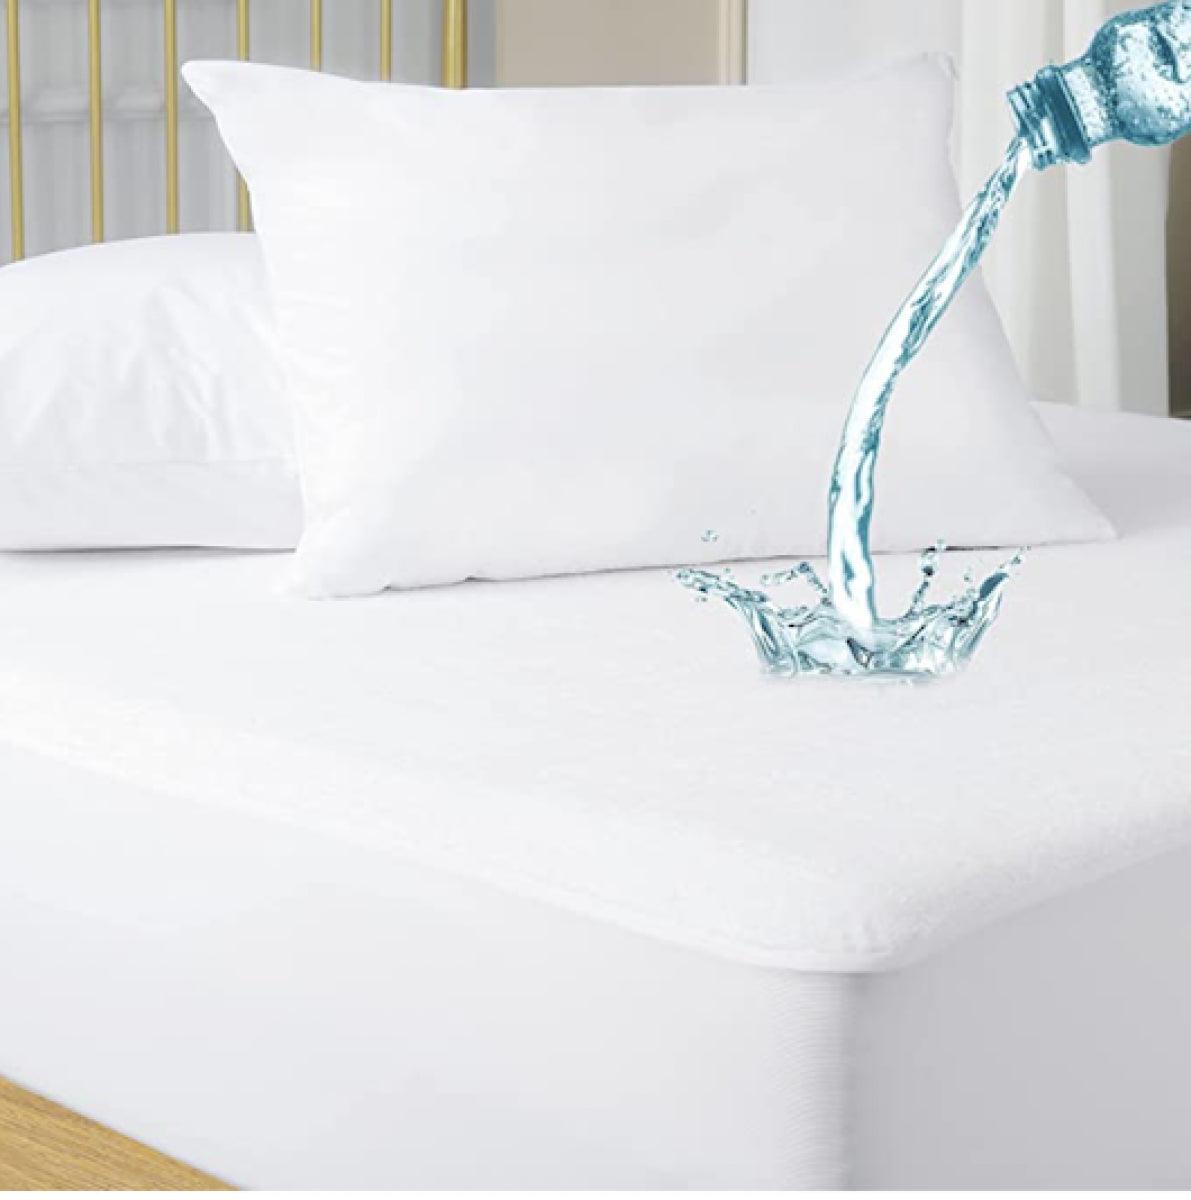 Relaxsit Waterproof Mattress Protector Cover King Queen and single size options Fitted with 12" side pils stretchable Relaxsit